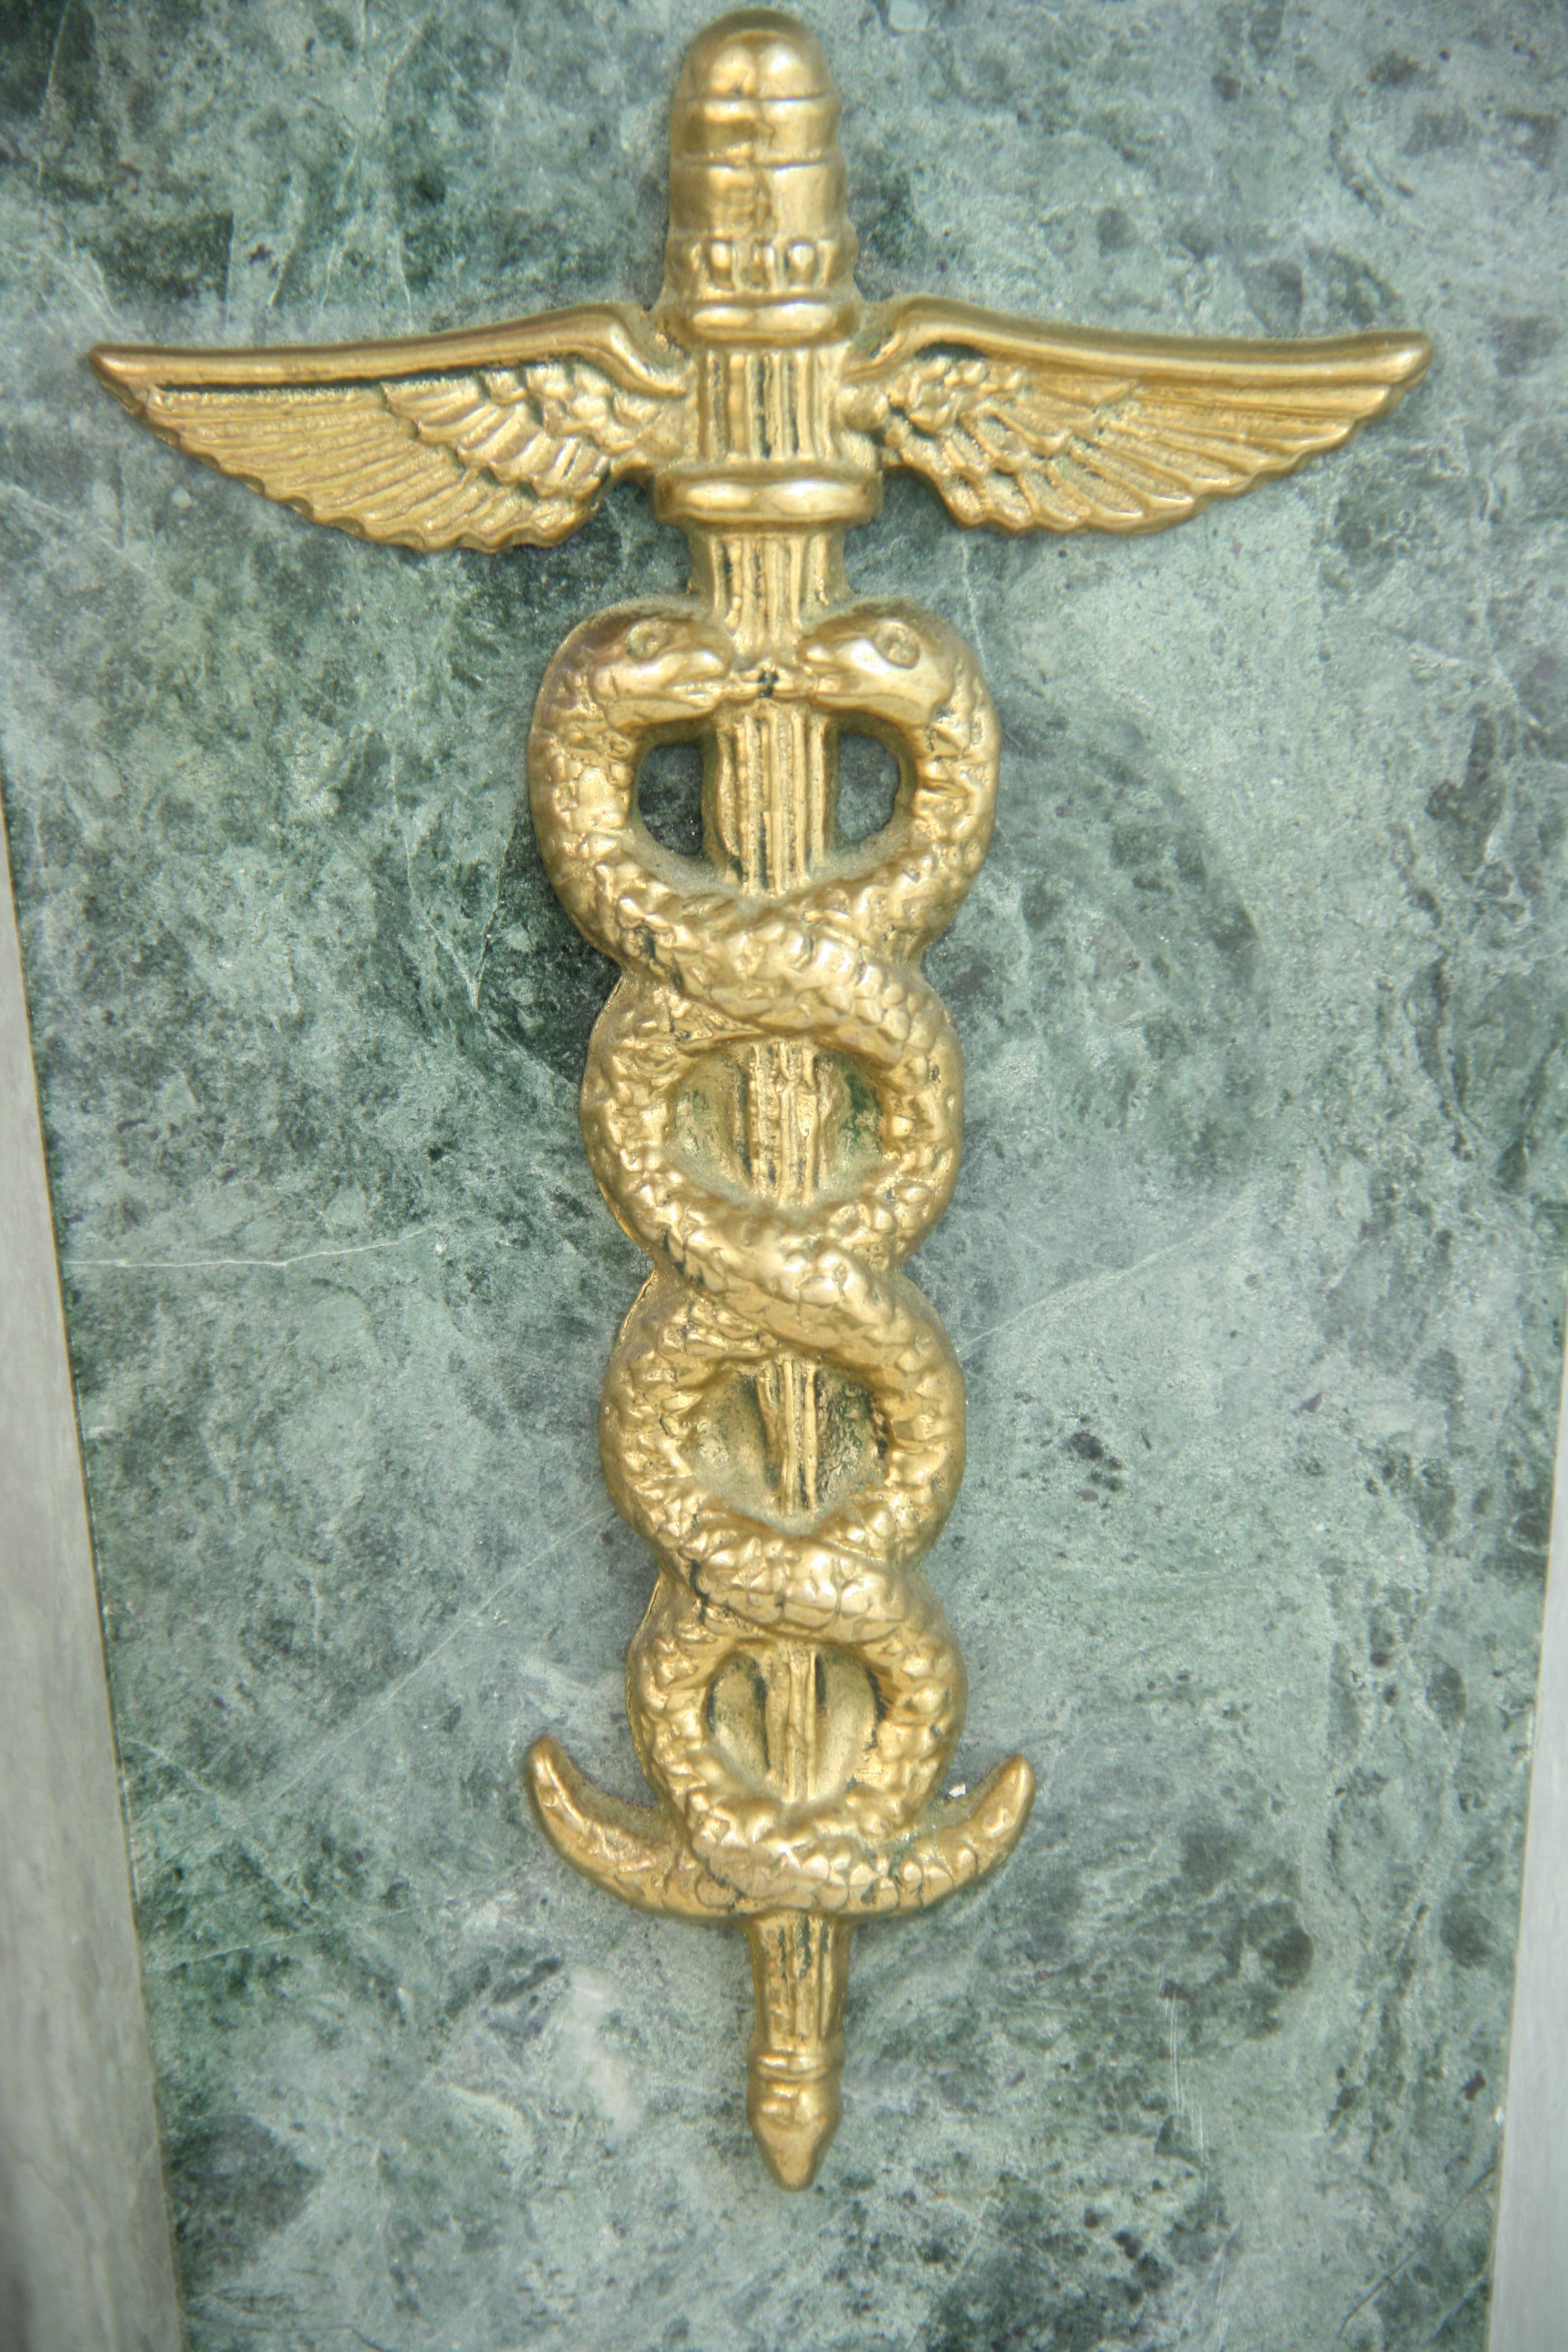 8-218 heavy green marble book ends with brass emblem of the medical profession.